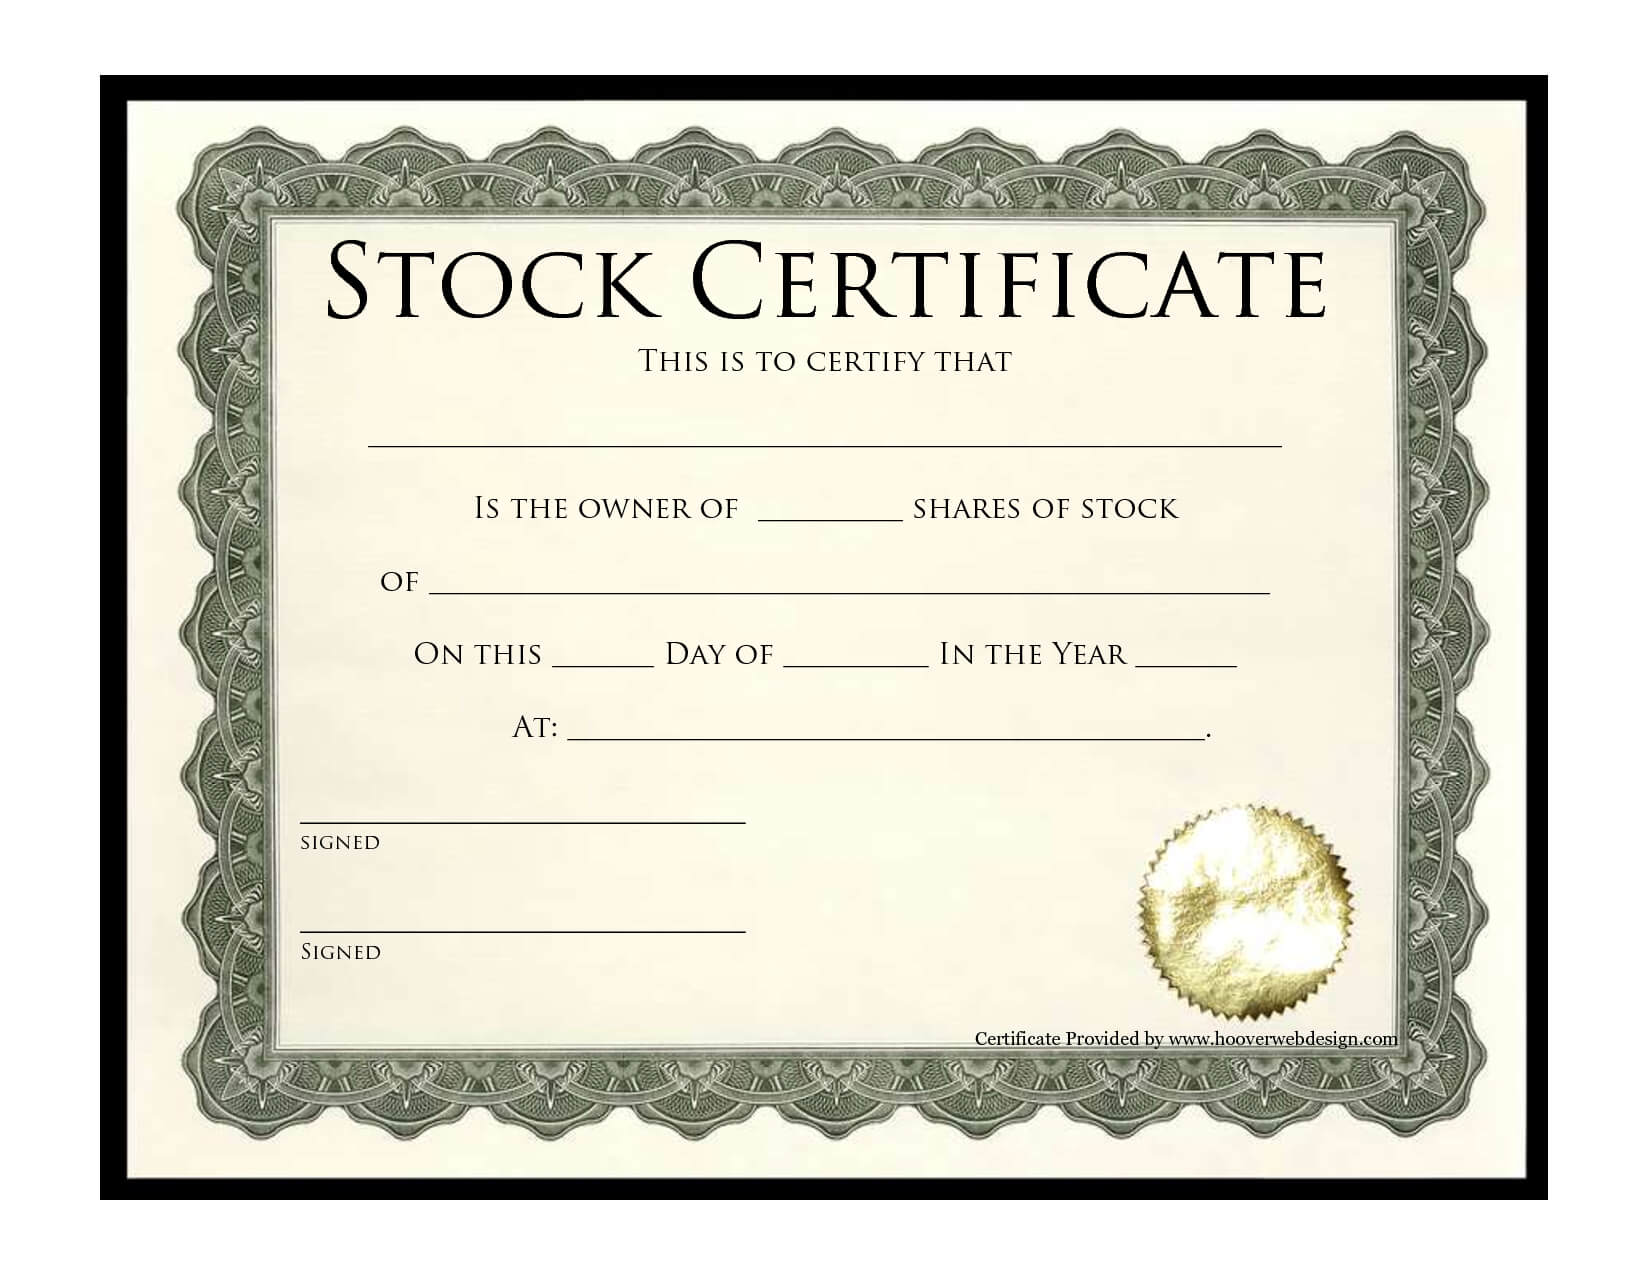 Stock Certificate Template | Best Template Collection With Regard To Share Certificate Template Companies House